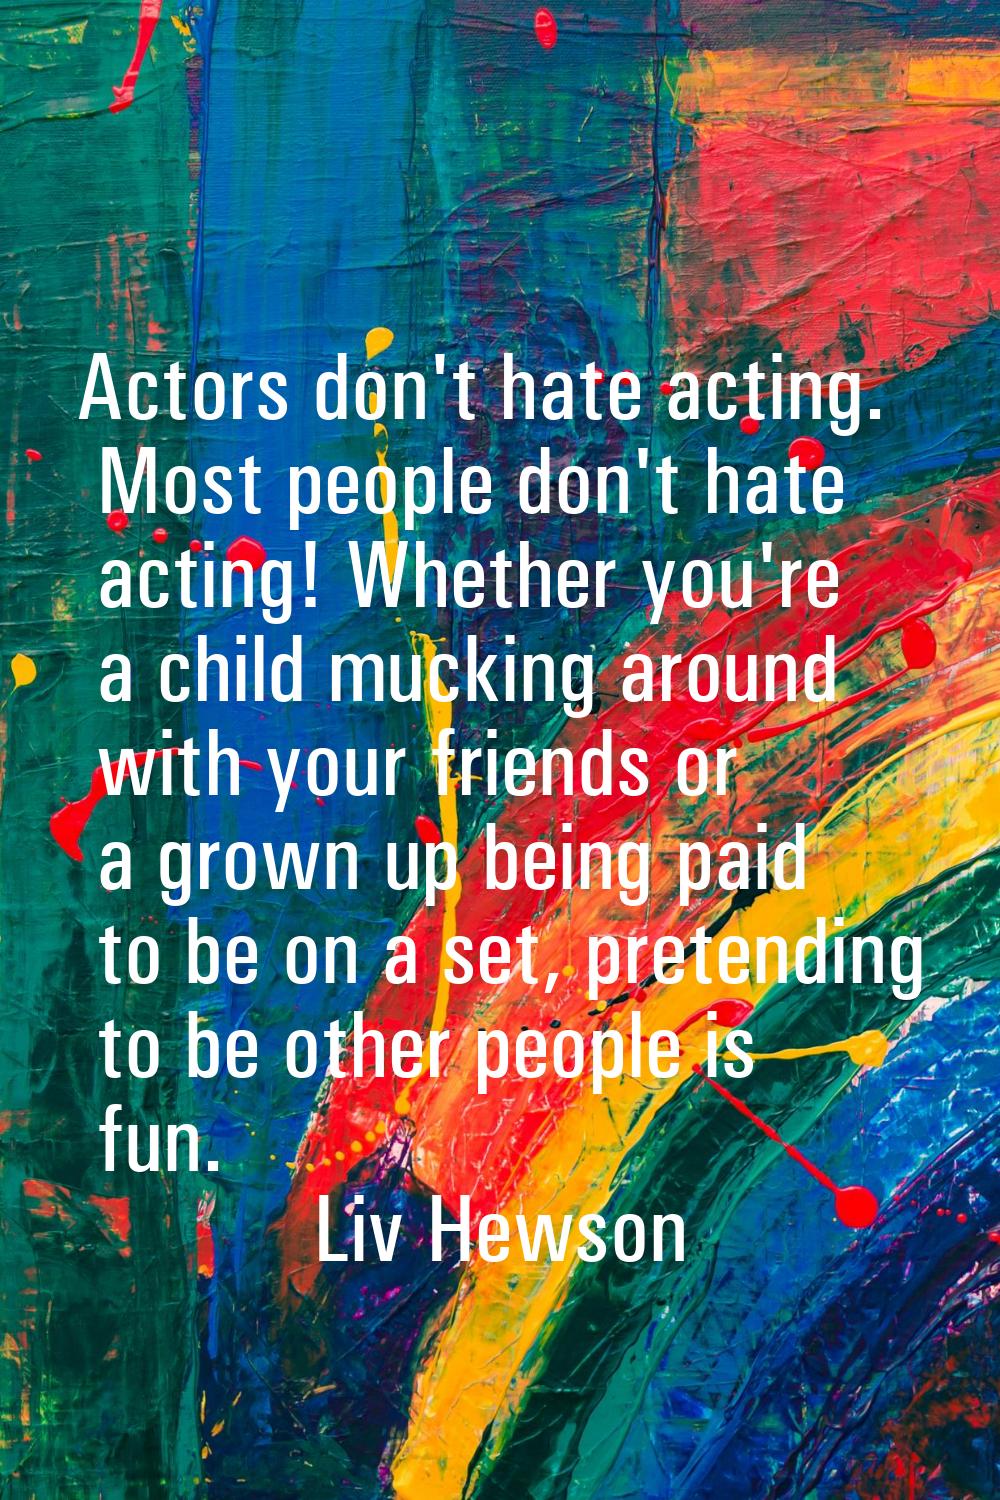 Actors don't hate acting. Most people don't hate acting! Whether you're a child mucking around with